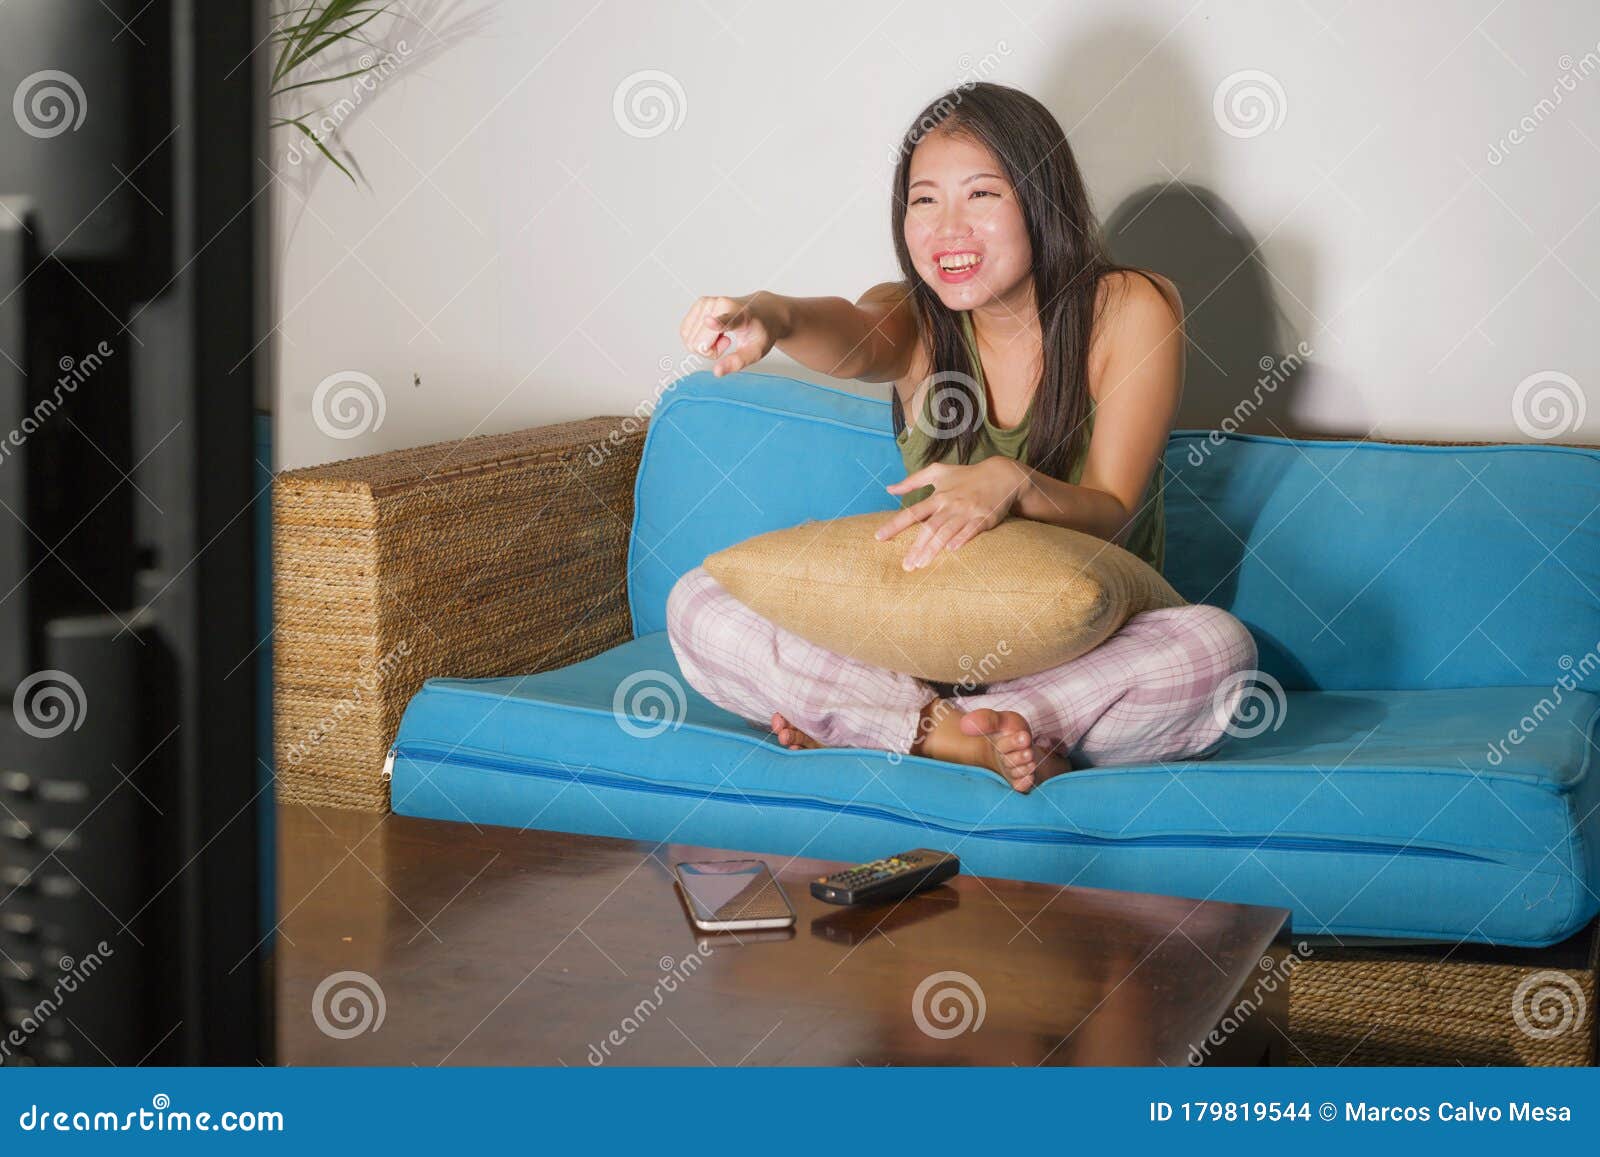 home-lifestyle-portrait-young-pretty-happy-asian-chinese-woman-laughing-watching-korean-comedy-tv-show-sitting-living-179819544.jpg